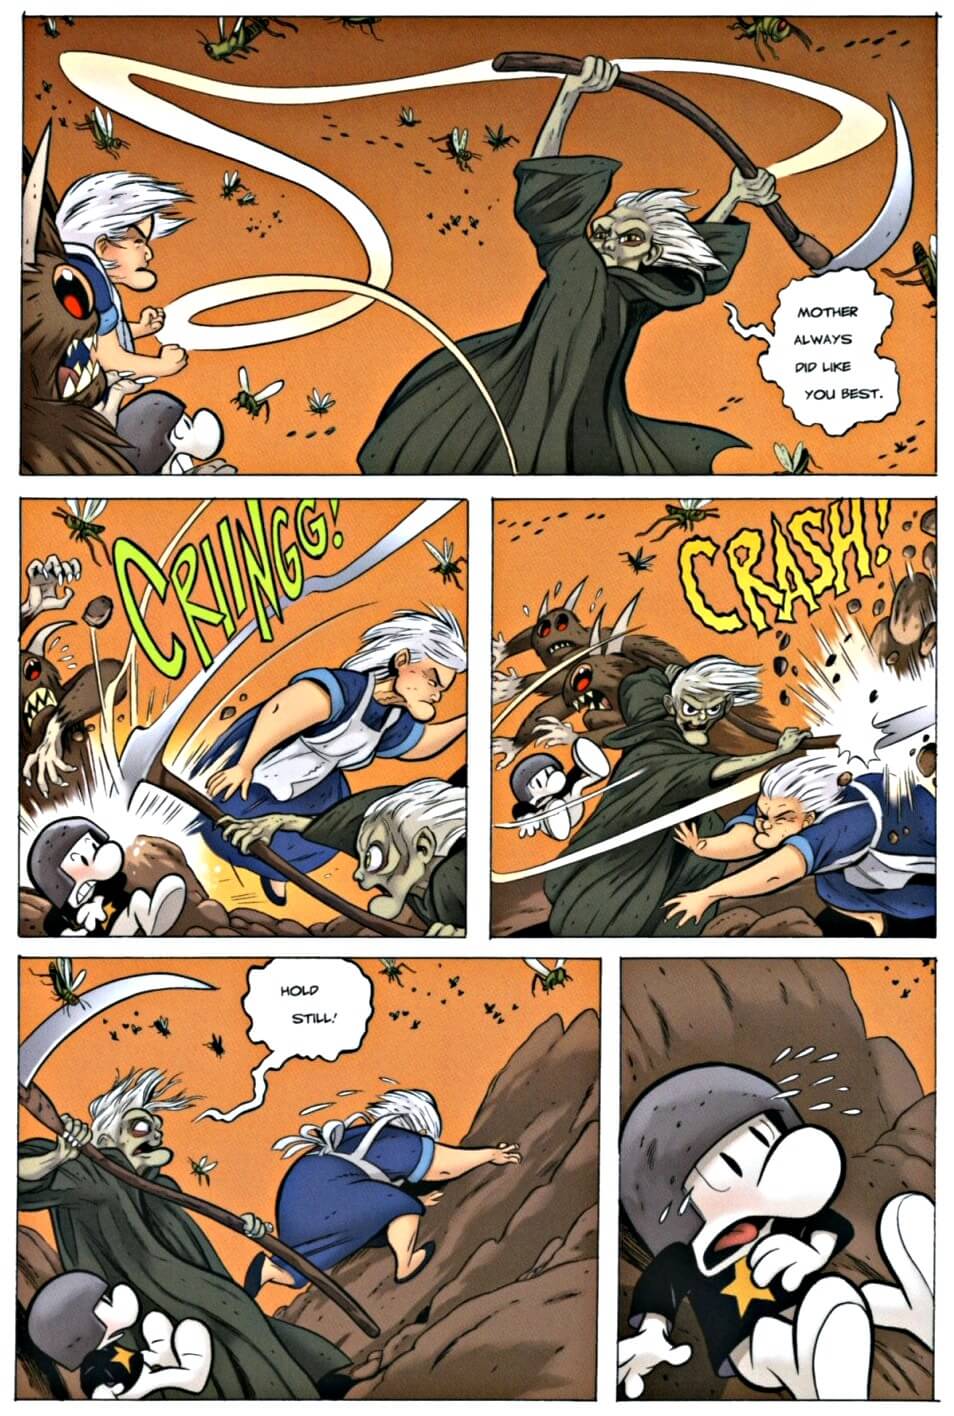 page 144 chapter 5 of bone 9 crown of horns graphic novel